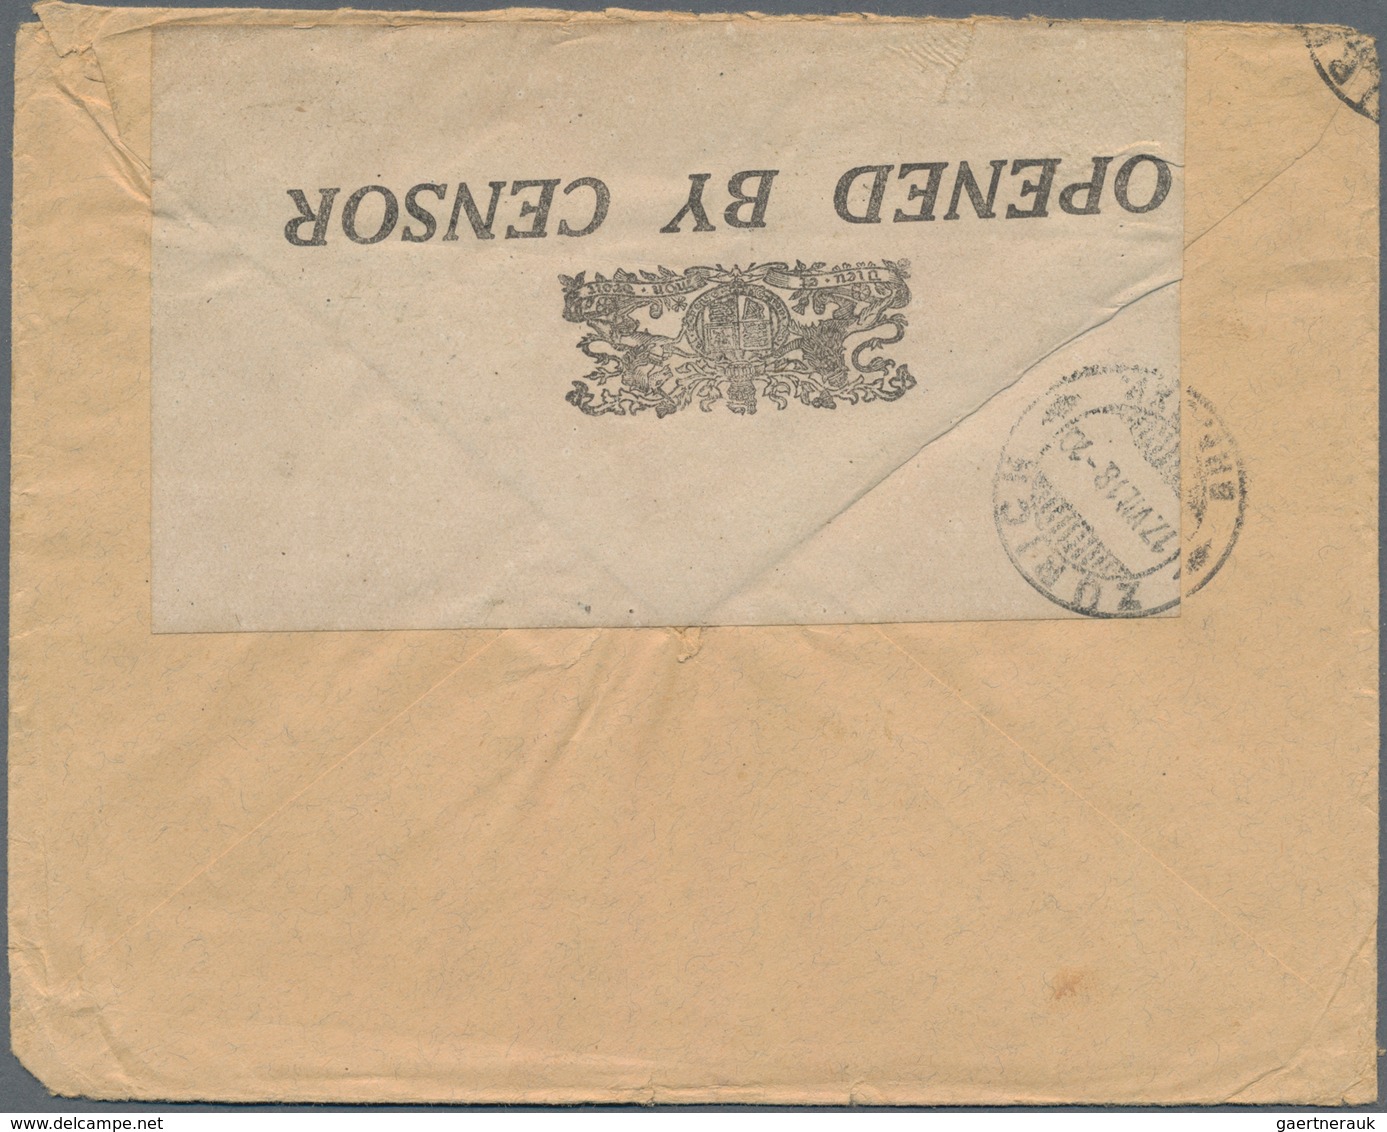 Indien - Feldpost: 1918 Registered And Censored Cover From Baghdad To Zurich, Switzerland Via Italy - Franquicia Militar